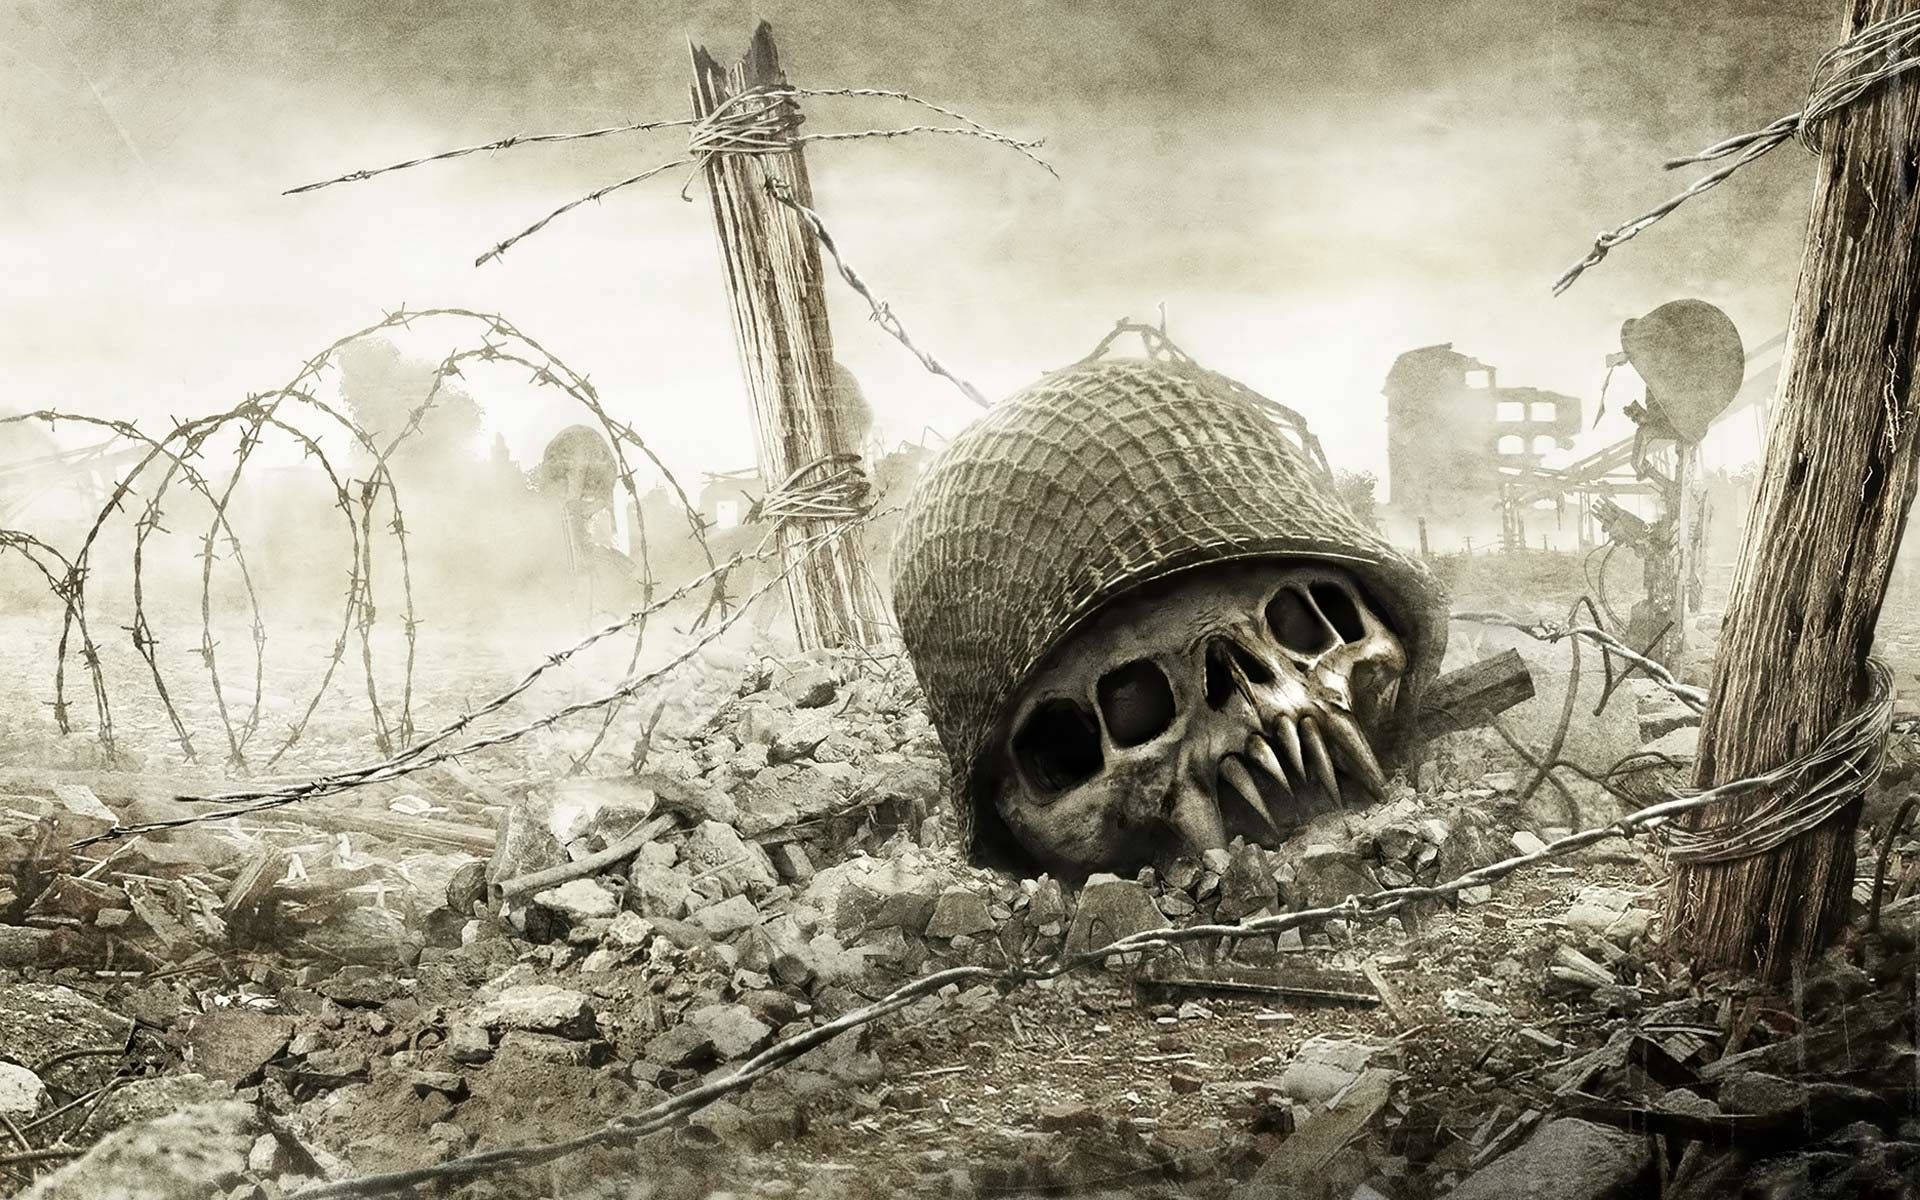 Battle-scarred Skull Remains As A Symbol Of War Background